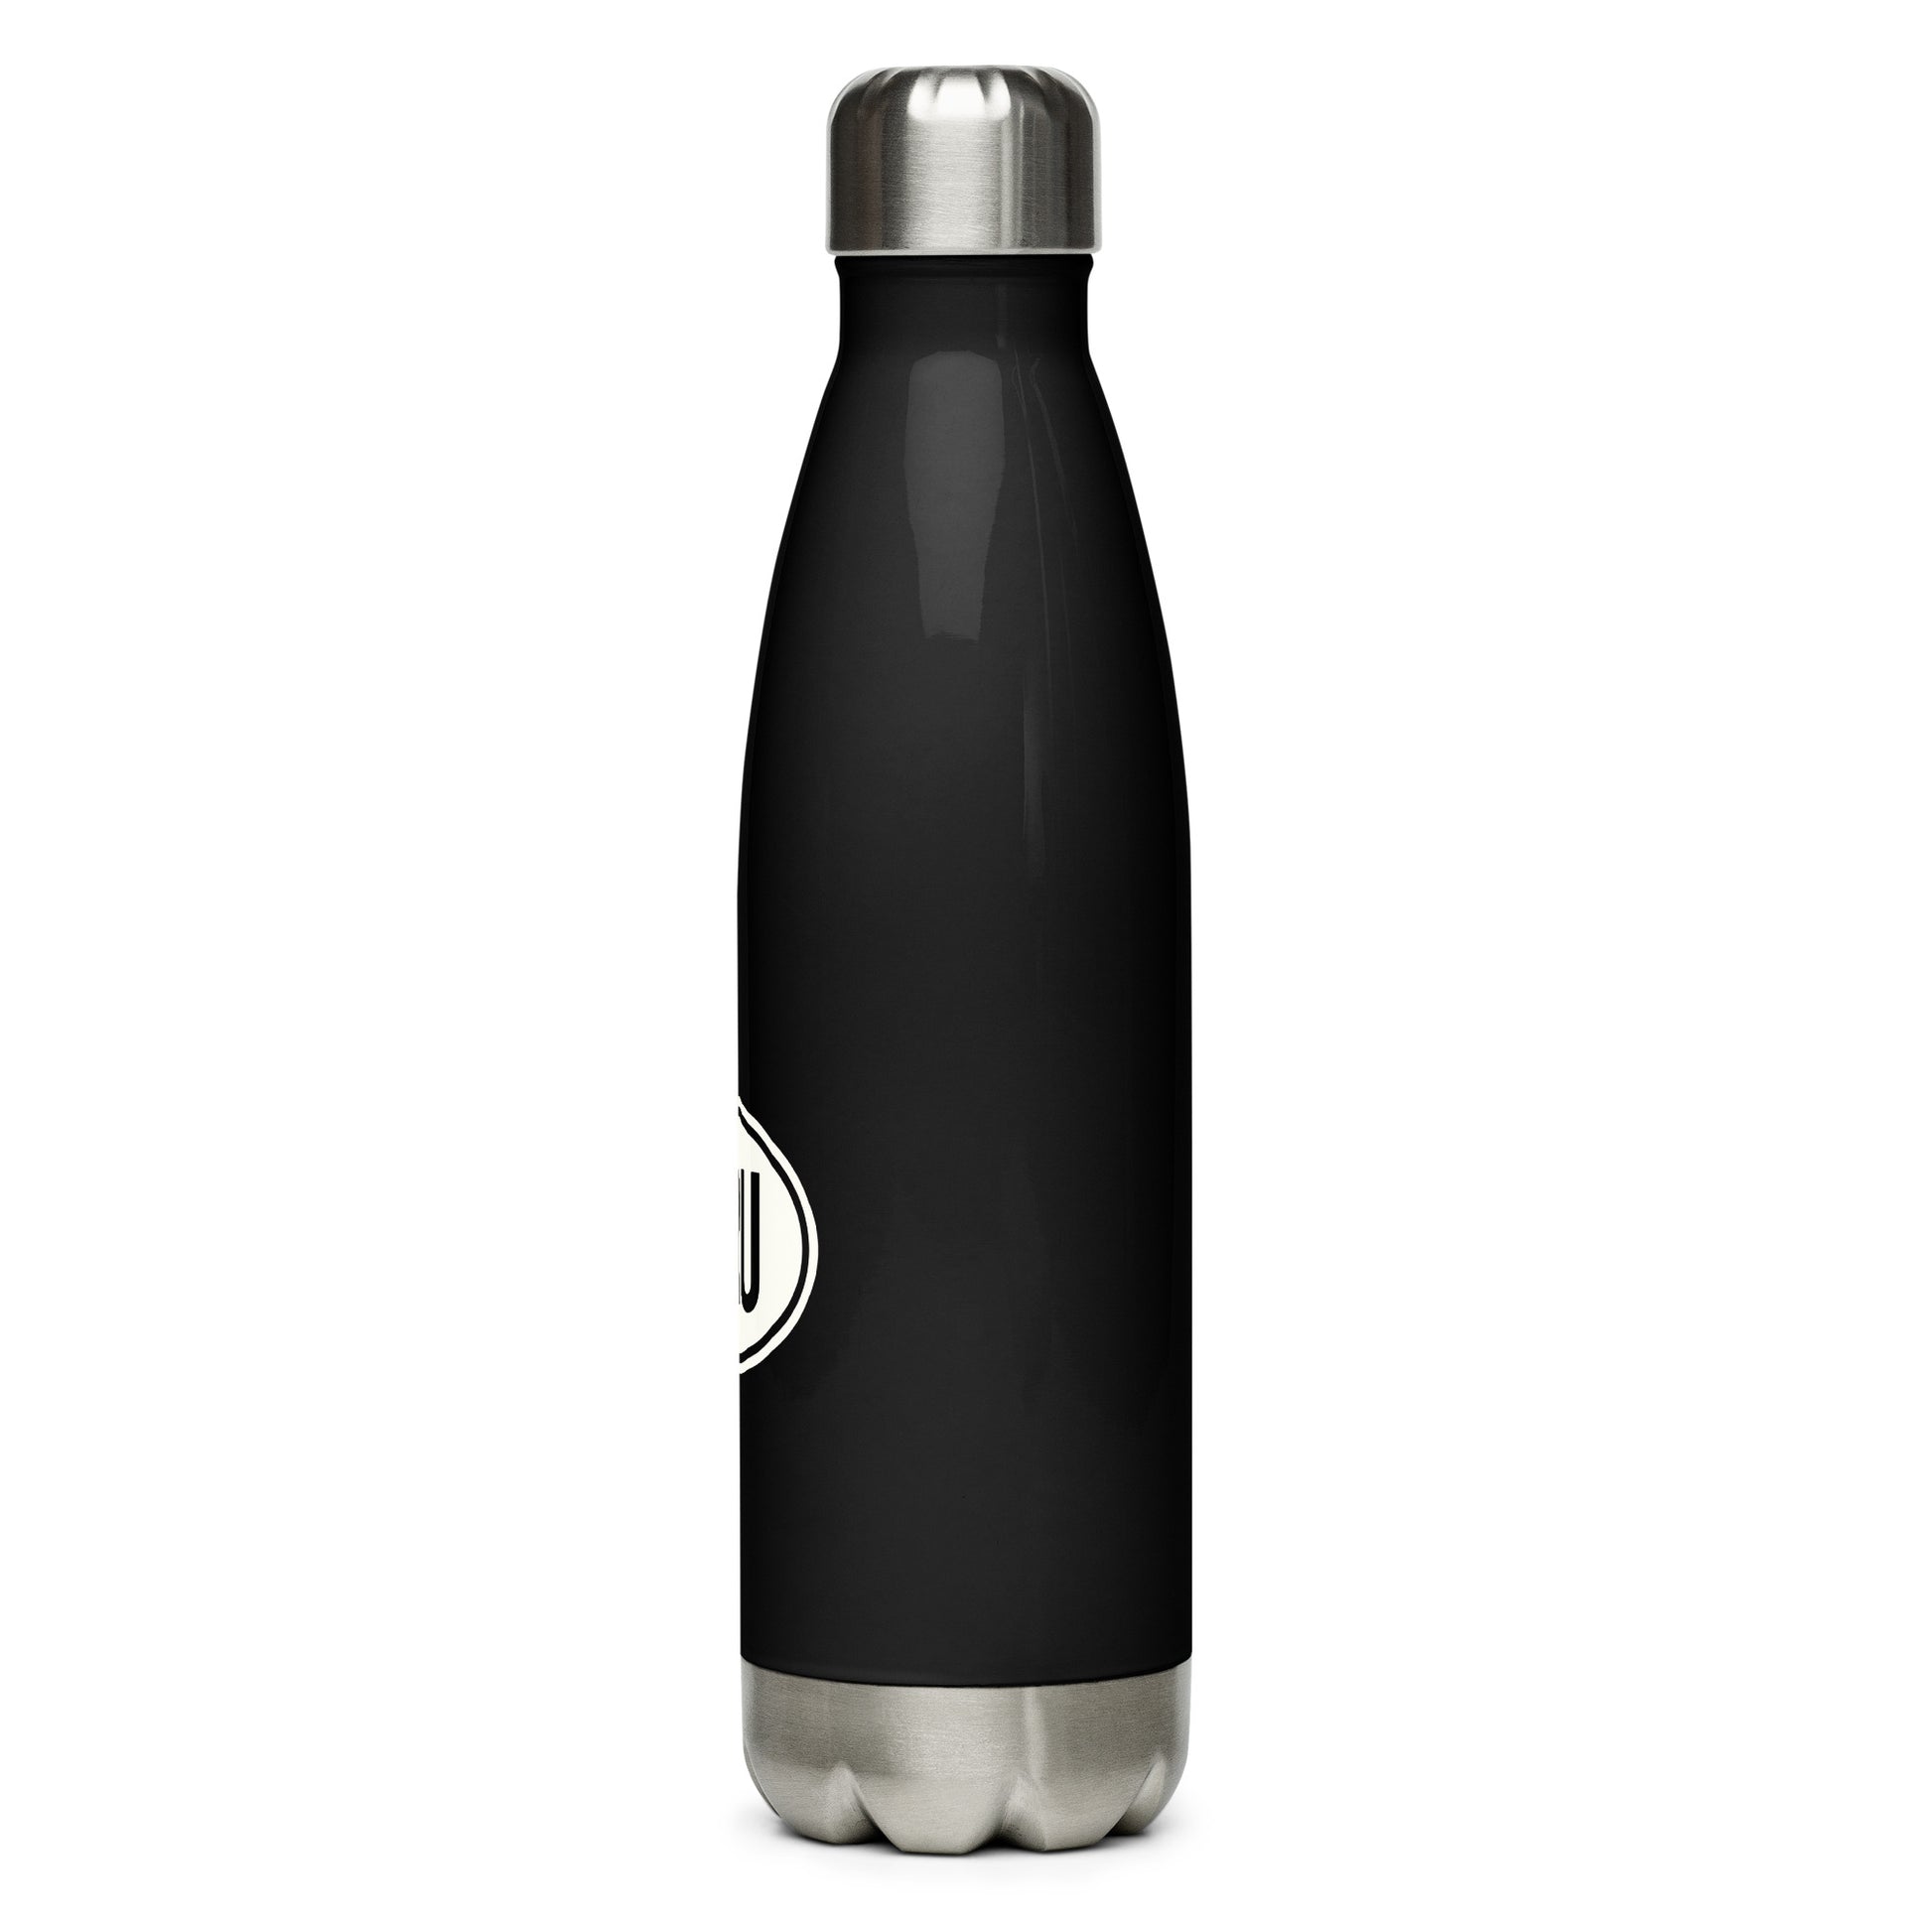 Unique Travel Gift Water Bottle - White Oval • BRU Brussels • YHM Designs - Image 06